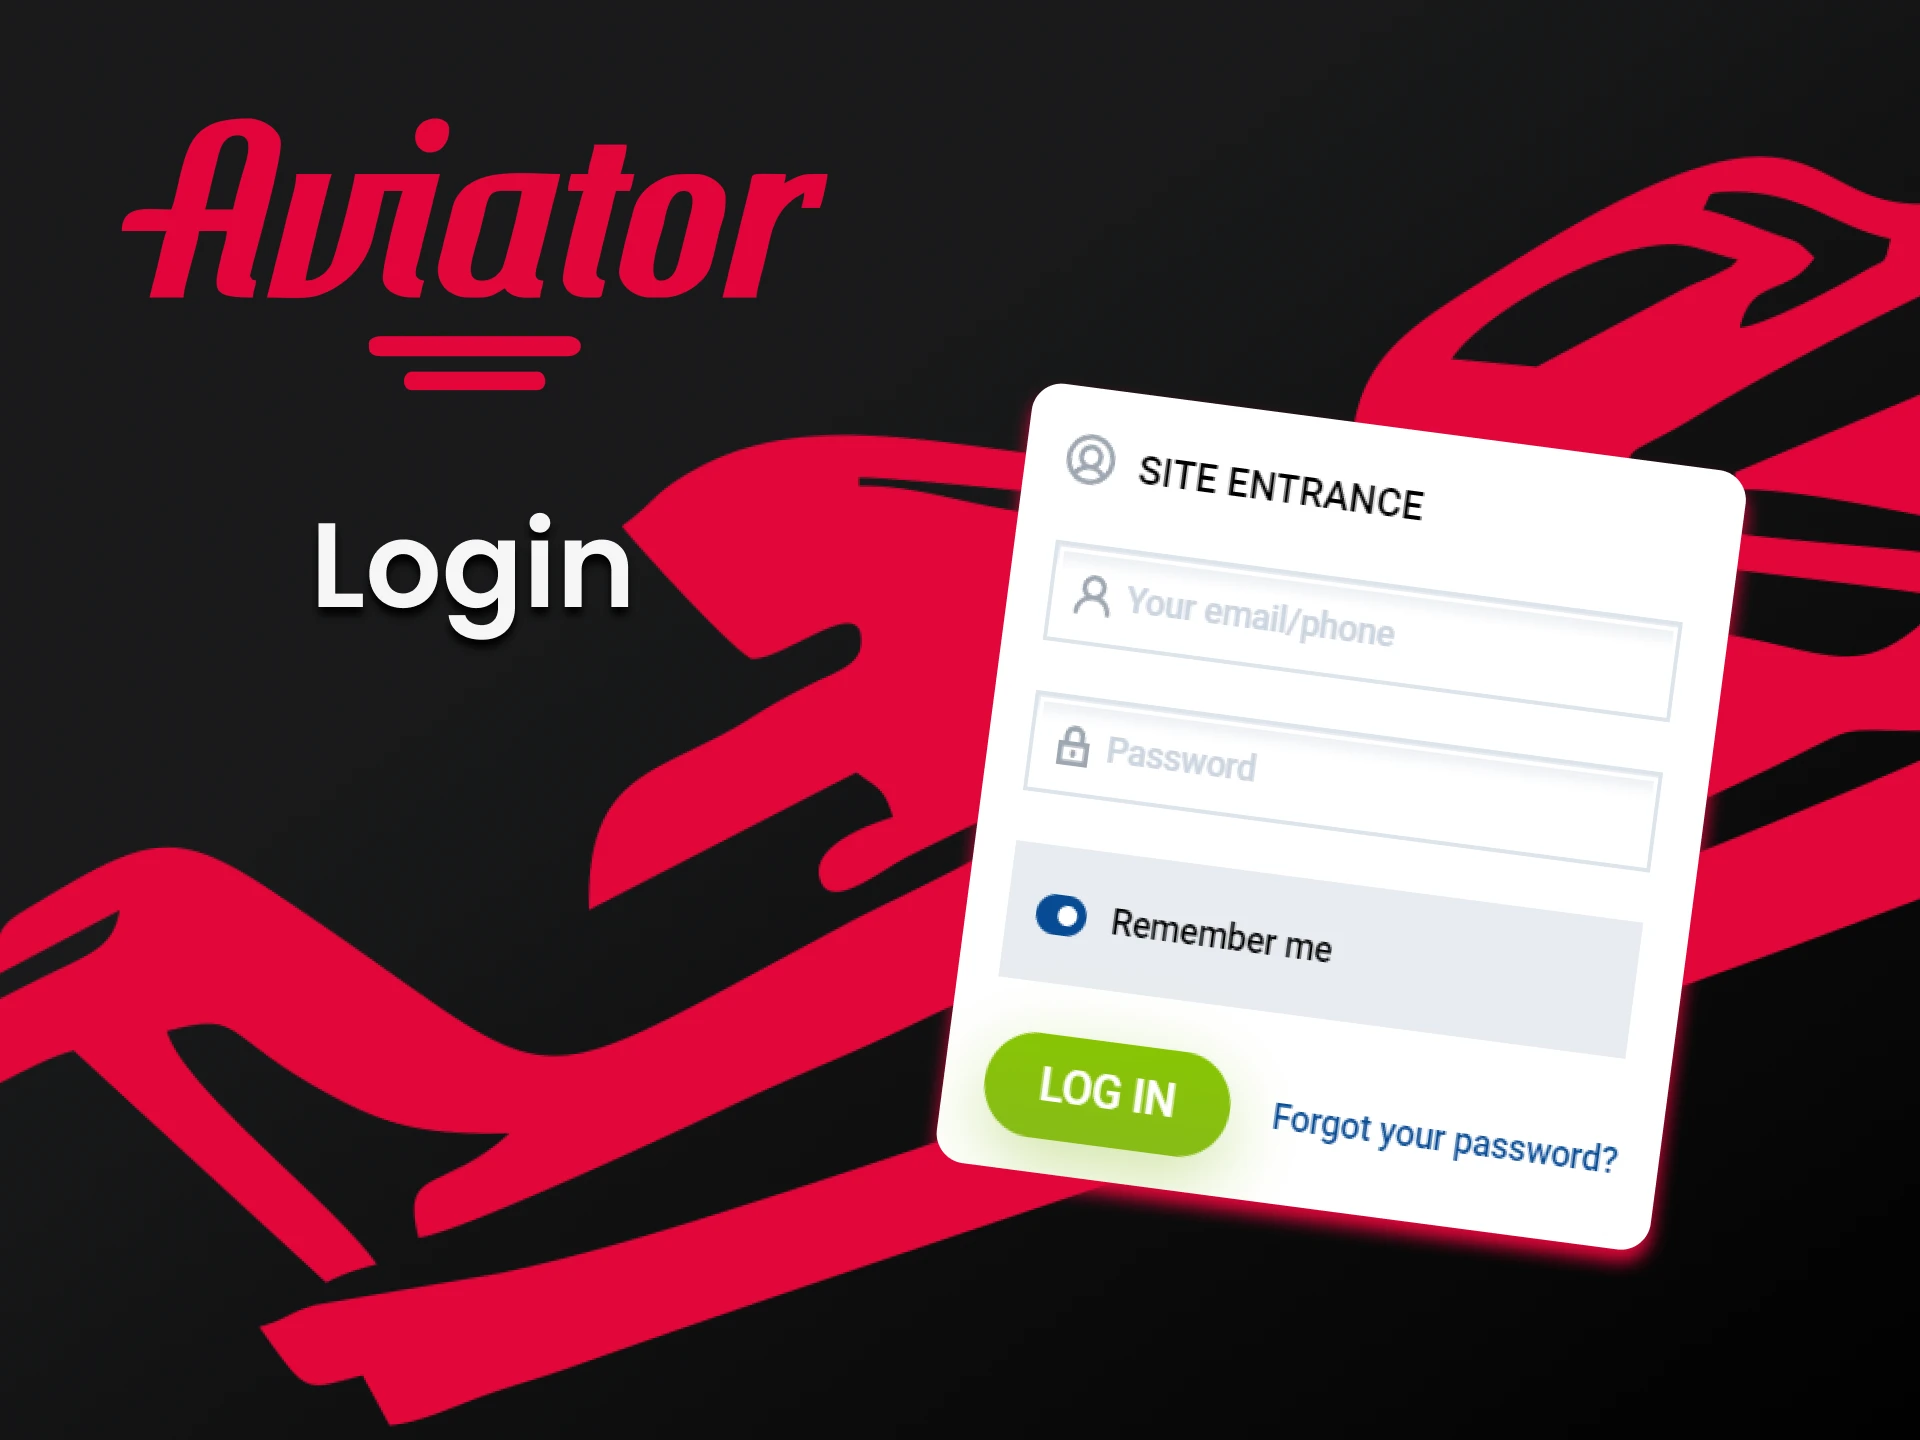 If you have an account, then to start playing Aviator, you need to log in to it.